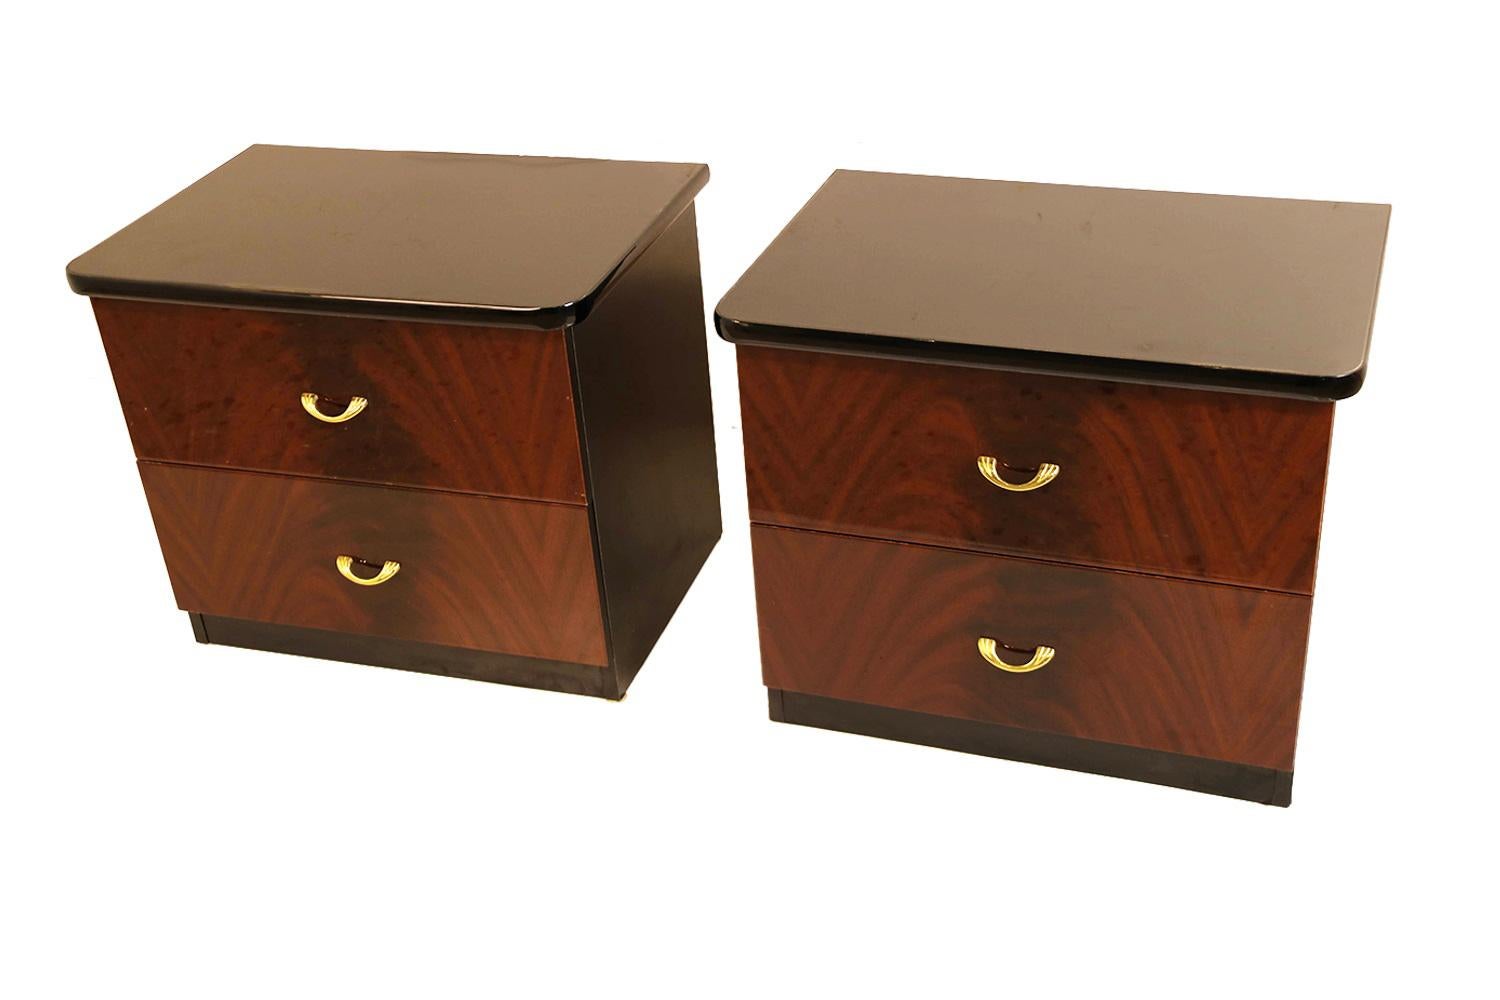 An attractive rare pair of beautifully matched early 20th century modern mahogany nightstands, tables. A fantastic pair of nightstands featuring crotch mahogany face and framed in painted black sides with polished black lacquered tops. Each includes